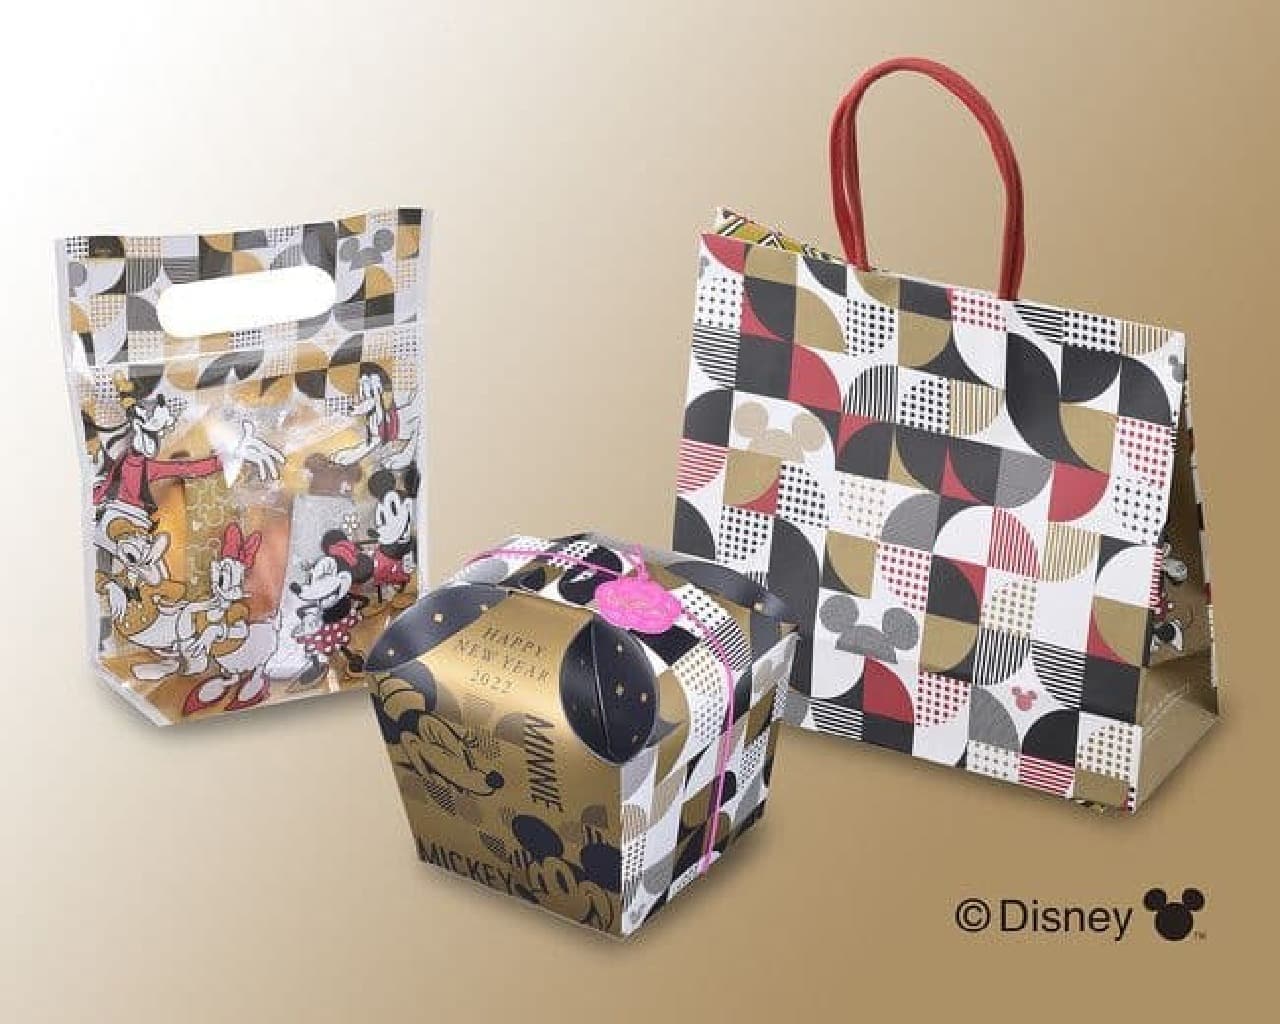 Ginza Cozy Corner "[Disney] New Year Sweets Pack (5 pieces)" "[Disney] New Year Sweets Box (6 pieces)"